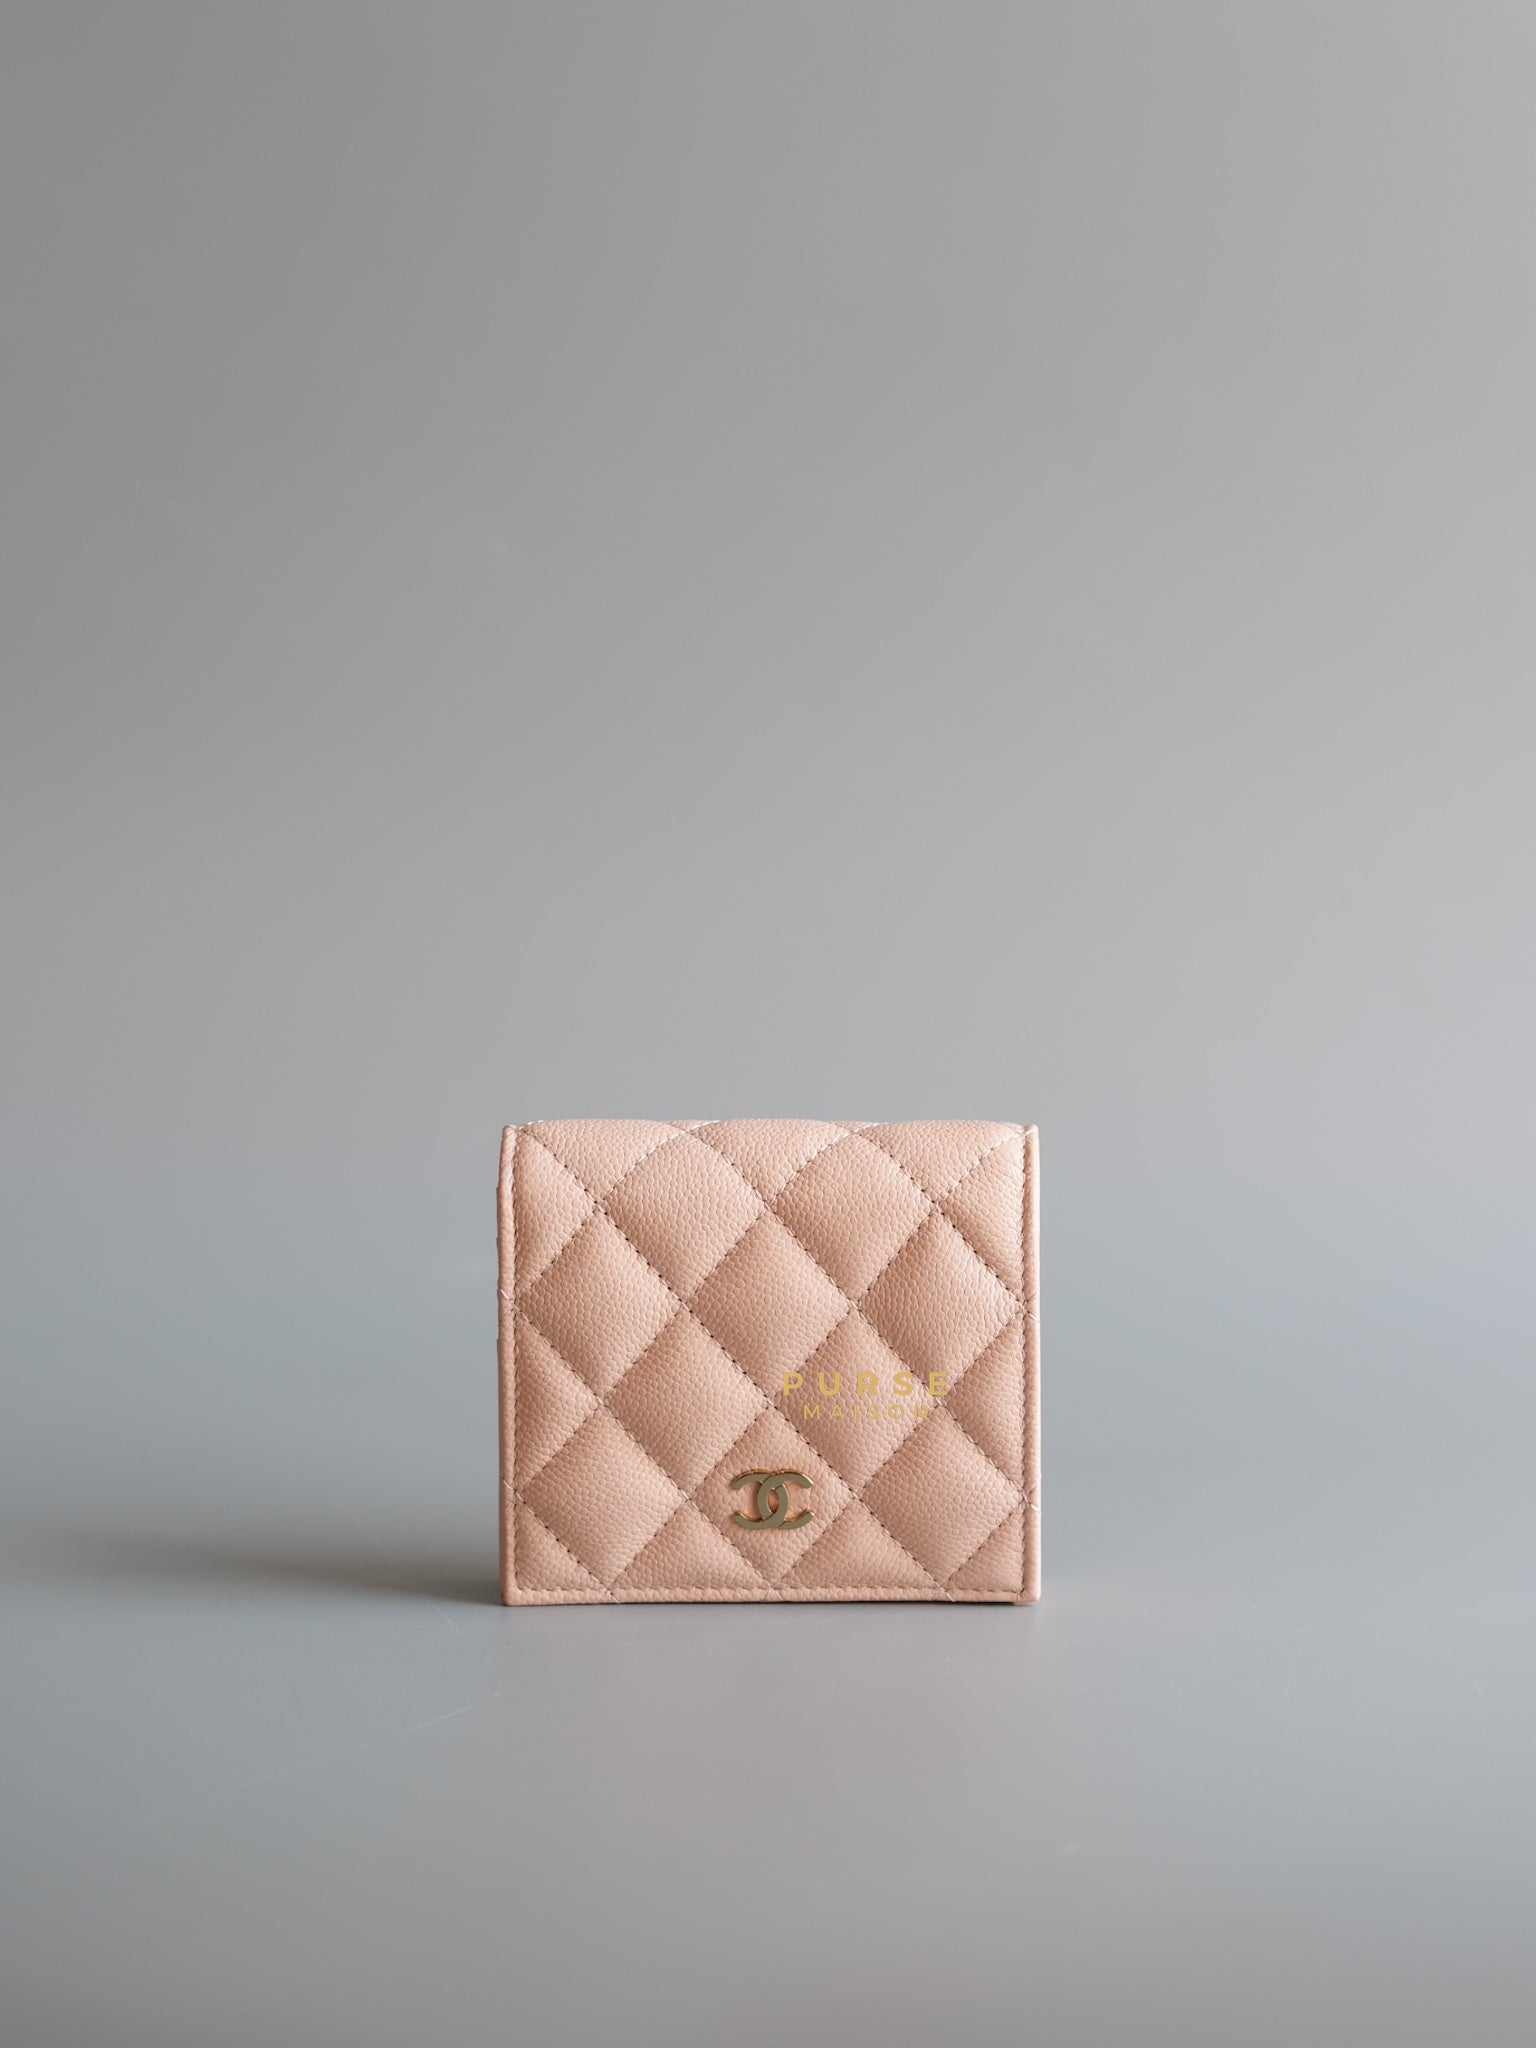 24C Cruise Folding Wallet in Peachy Pink Caviar Leather and Gold Hardware (microchip) | Purse Maison Luxury Bags Shop